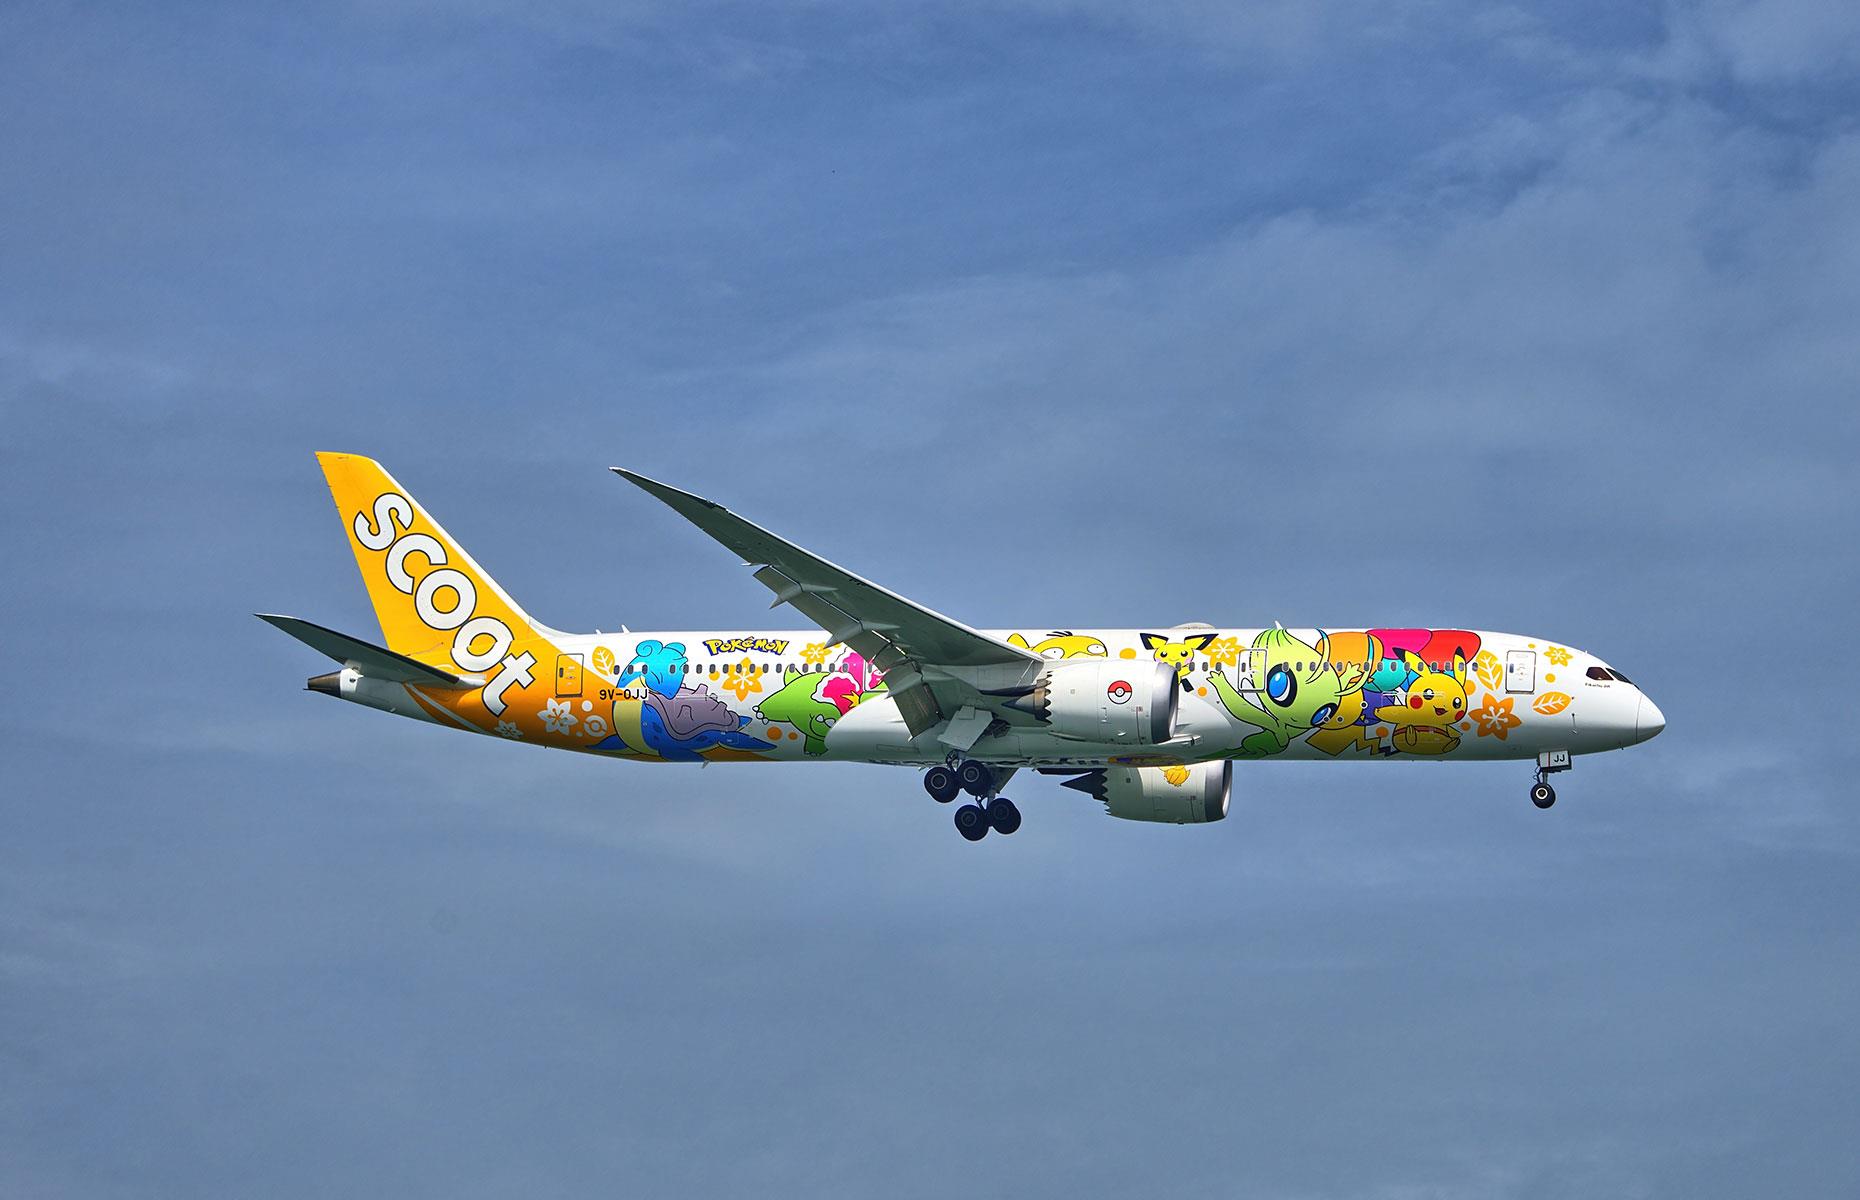 <p>But there's another reason everyone's talking about Scoot. In September 2022, it launched its first Pokémon-themed plane (pictured). The Boeing 787-9 Dreamliner (or "Pikachu Jet"), with its colorful livery and Japanese-inspired menu, serves selected journeys between Singapore, Taipei, Nanjing, Tokyo and Seoul throughout 2023.</p>  <p><a href="https://www.loveexploring.com/news/64647/the-airlines-with-the-most-and-least-delays-revealed"><strong>Check out the airlines with the most (and least) delays</strong></a></p>